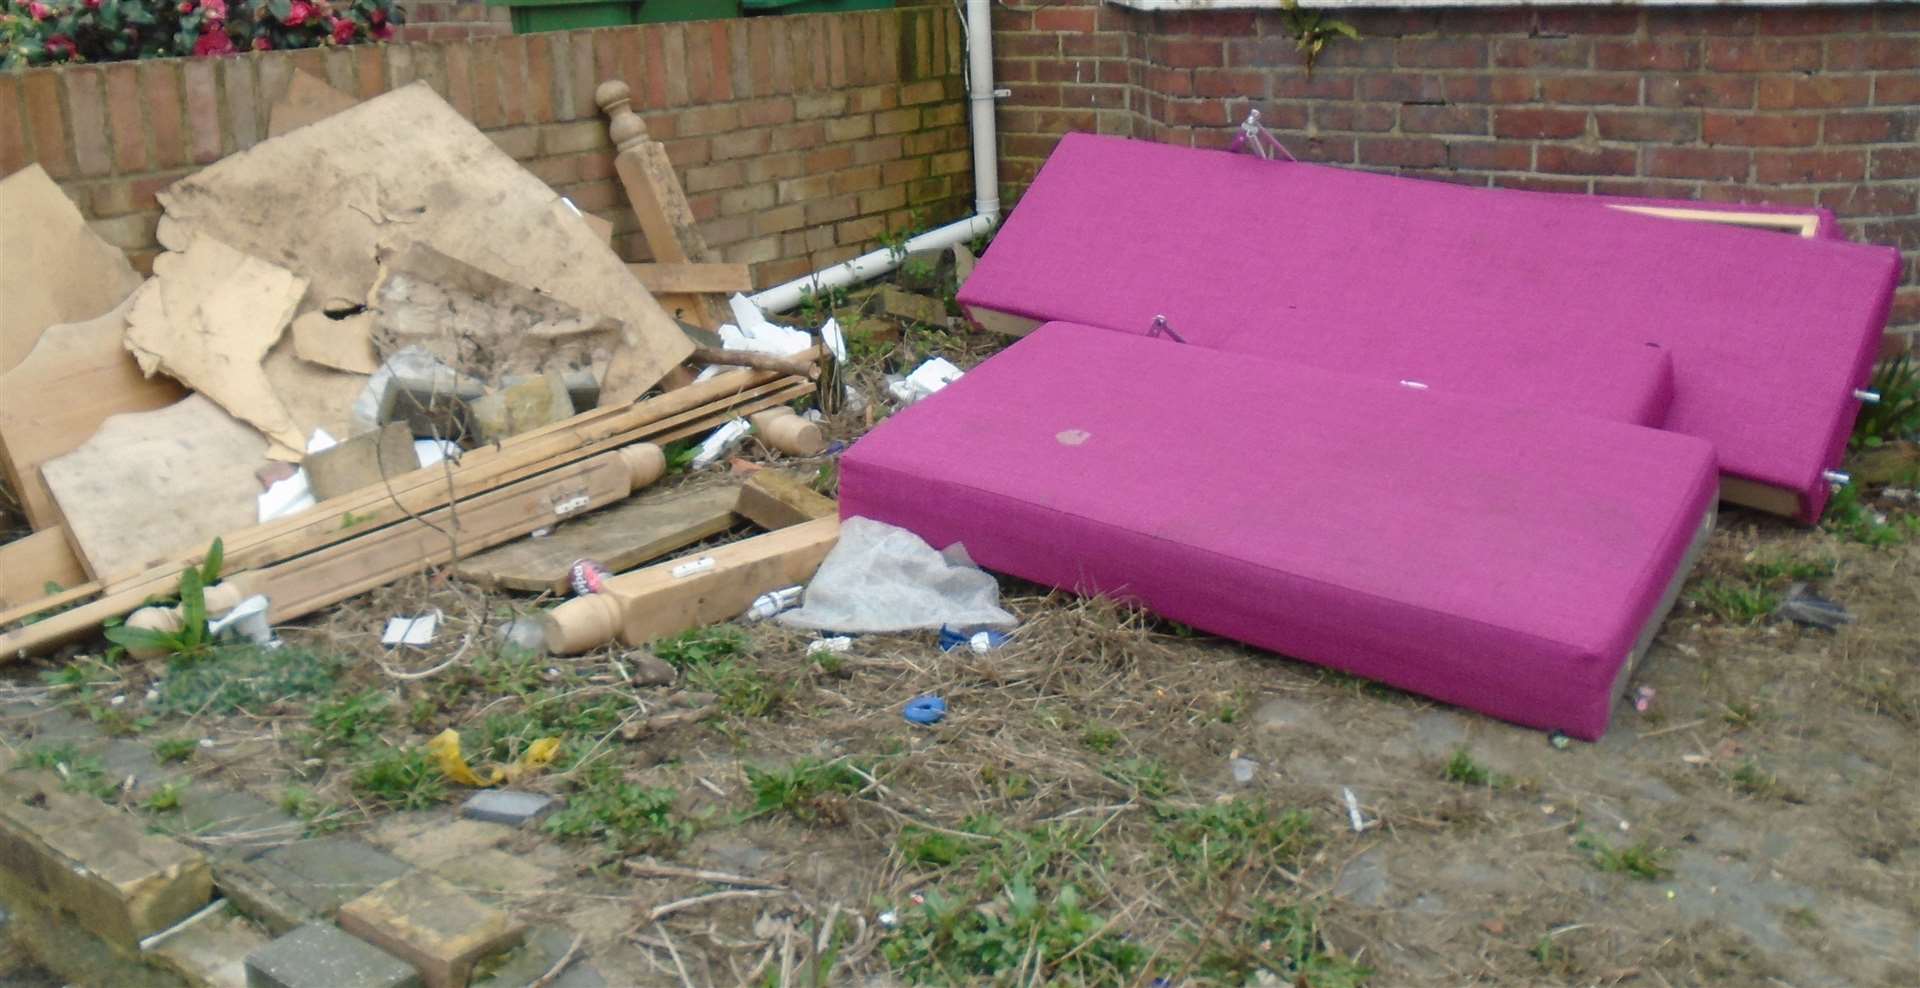 Tara James was prosecuted after leaving broken furniture and household waste near her Baldwin Terrace home